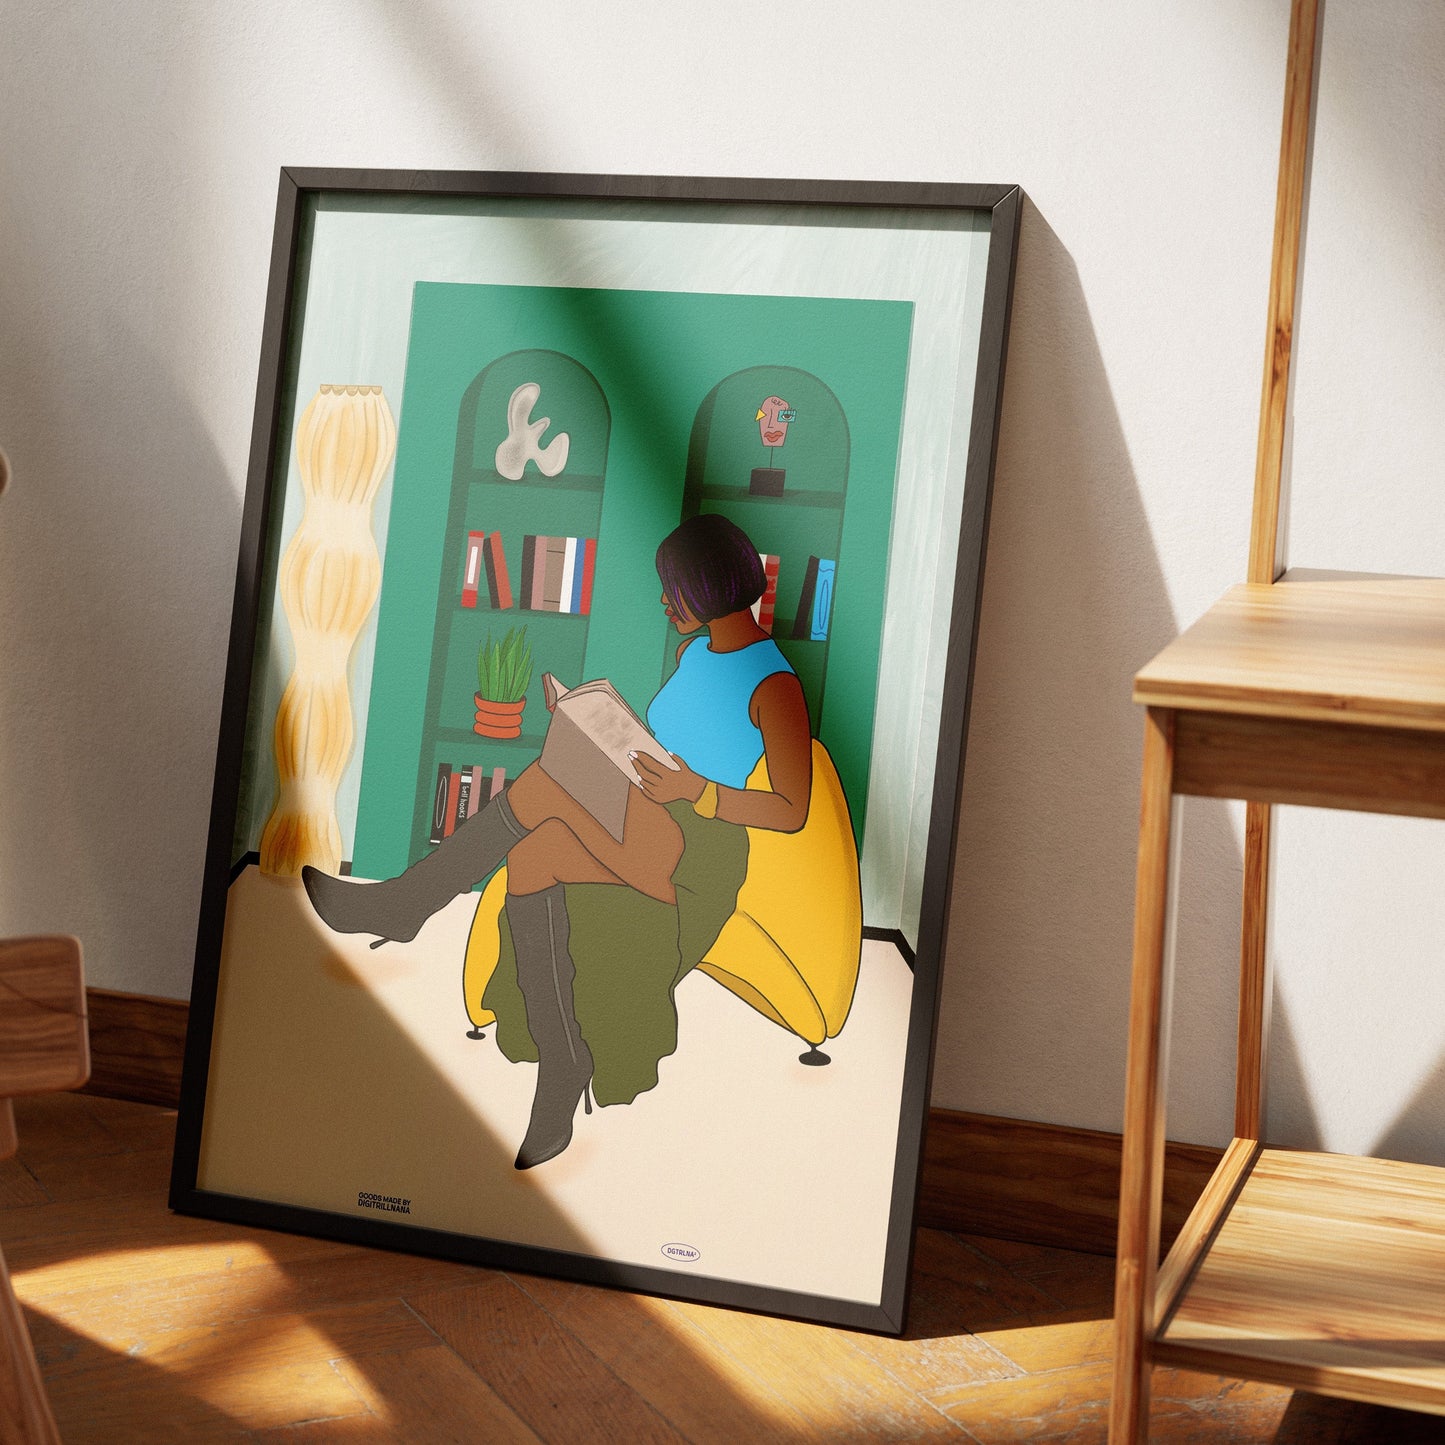 Cozy 9x12" 18x24” art print from Goods Made By Digitrillnana, Ashley Fletcher. Black woman, fashion, book lover, colorful. Perfect for home decor, wall art, art prints, and more!